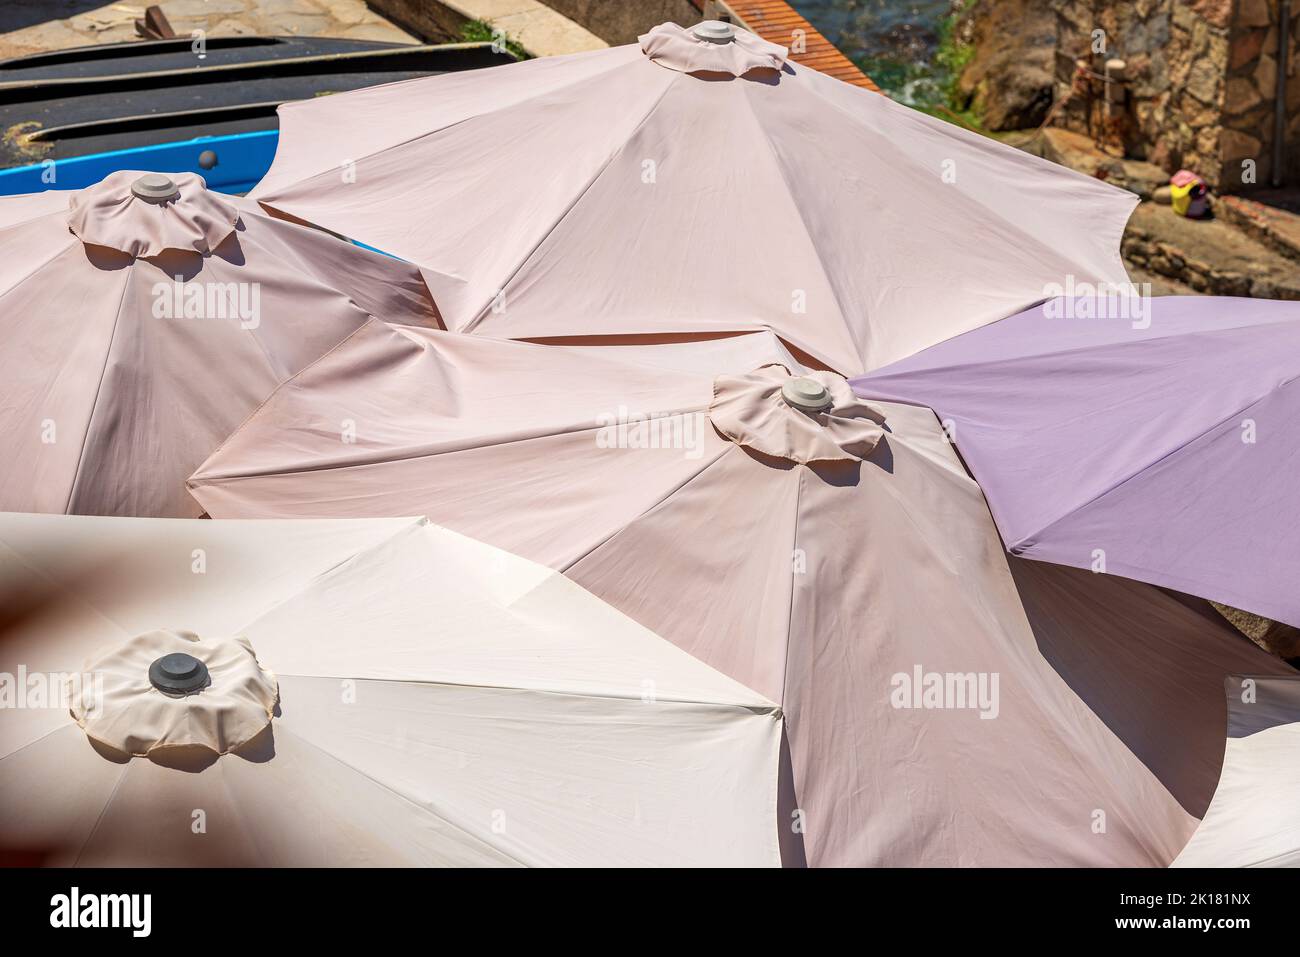 Close-up of a group of beach umbrellas seen from above, coast of Mediterranean sea, Liguria, Italy, Europe. Beach holiday concept or UV protection. Stock Photo